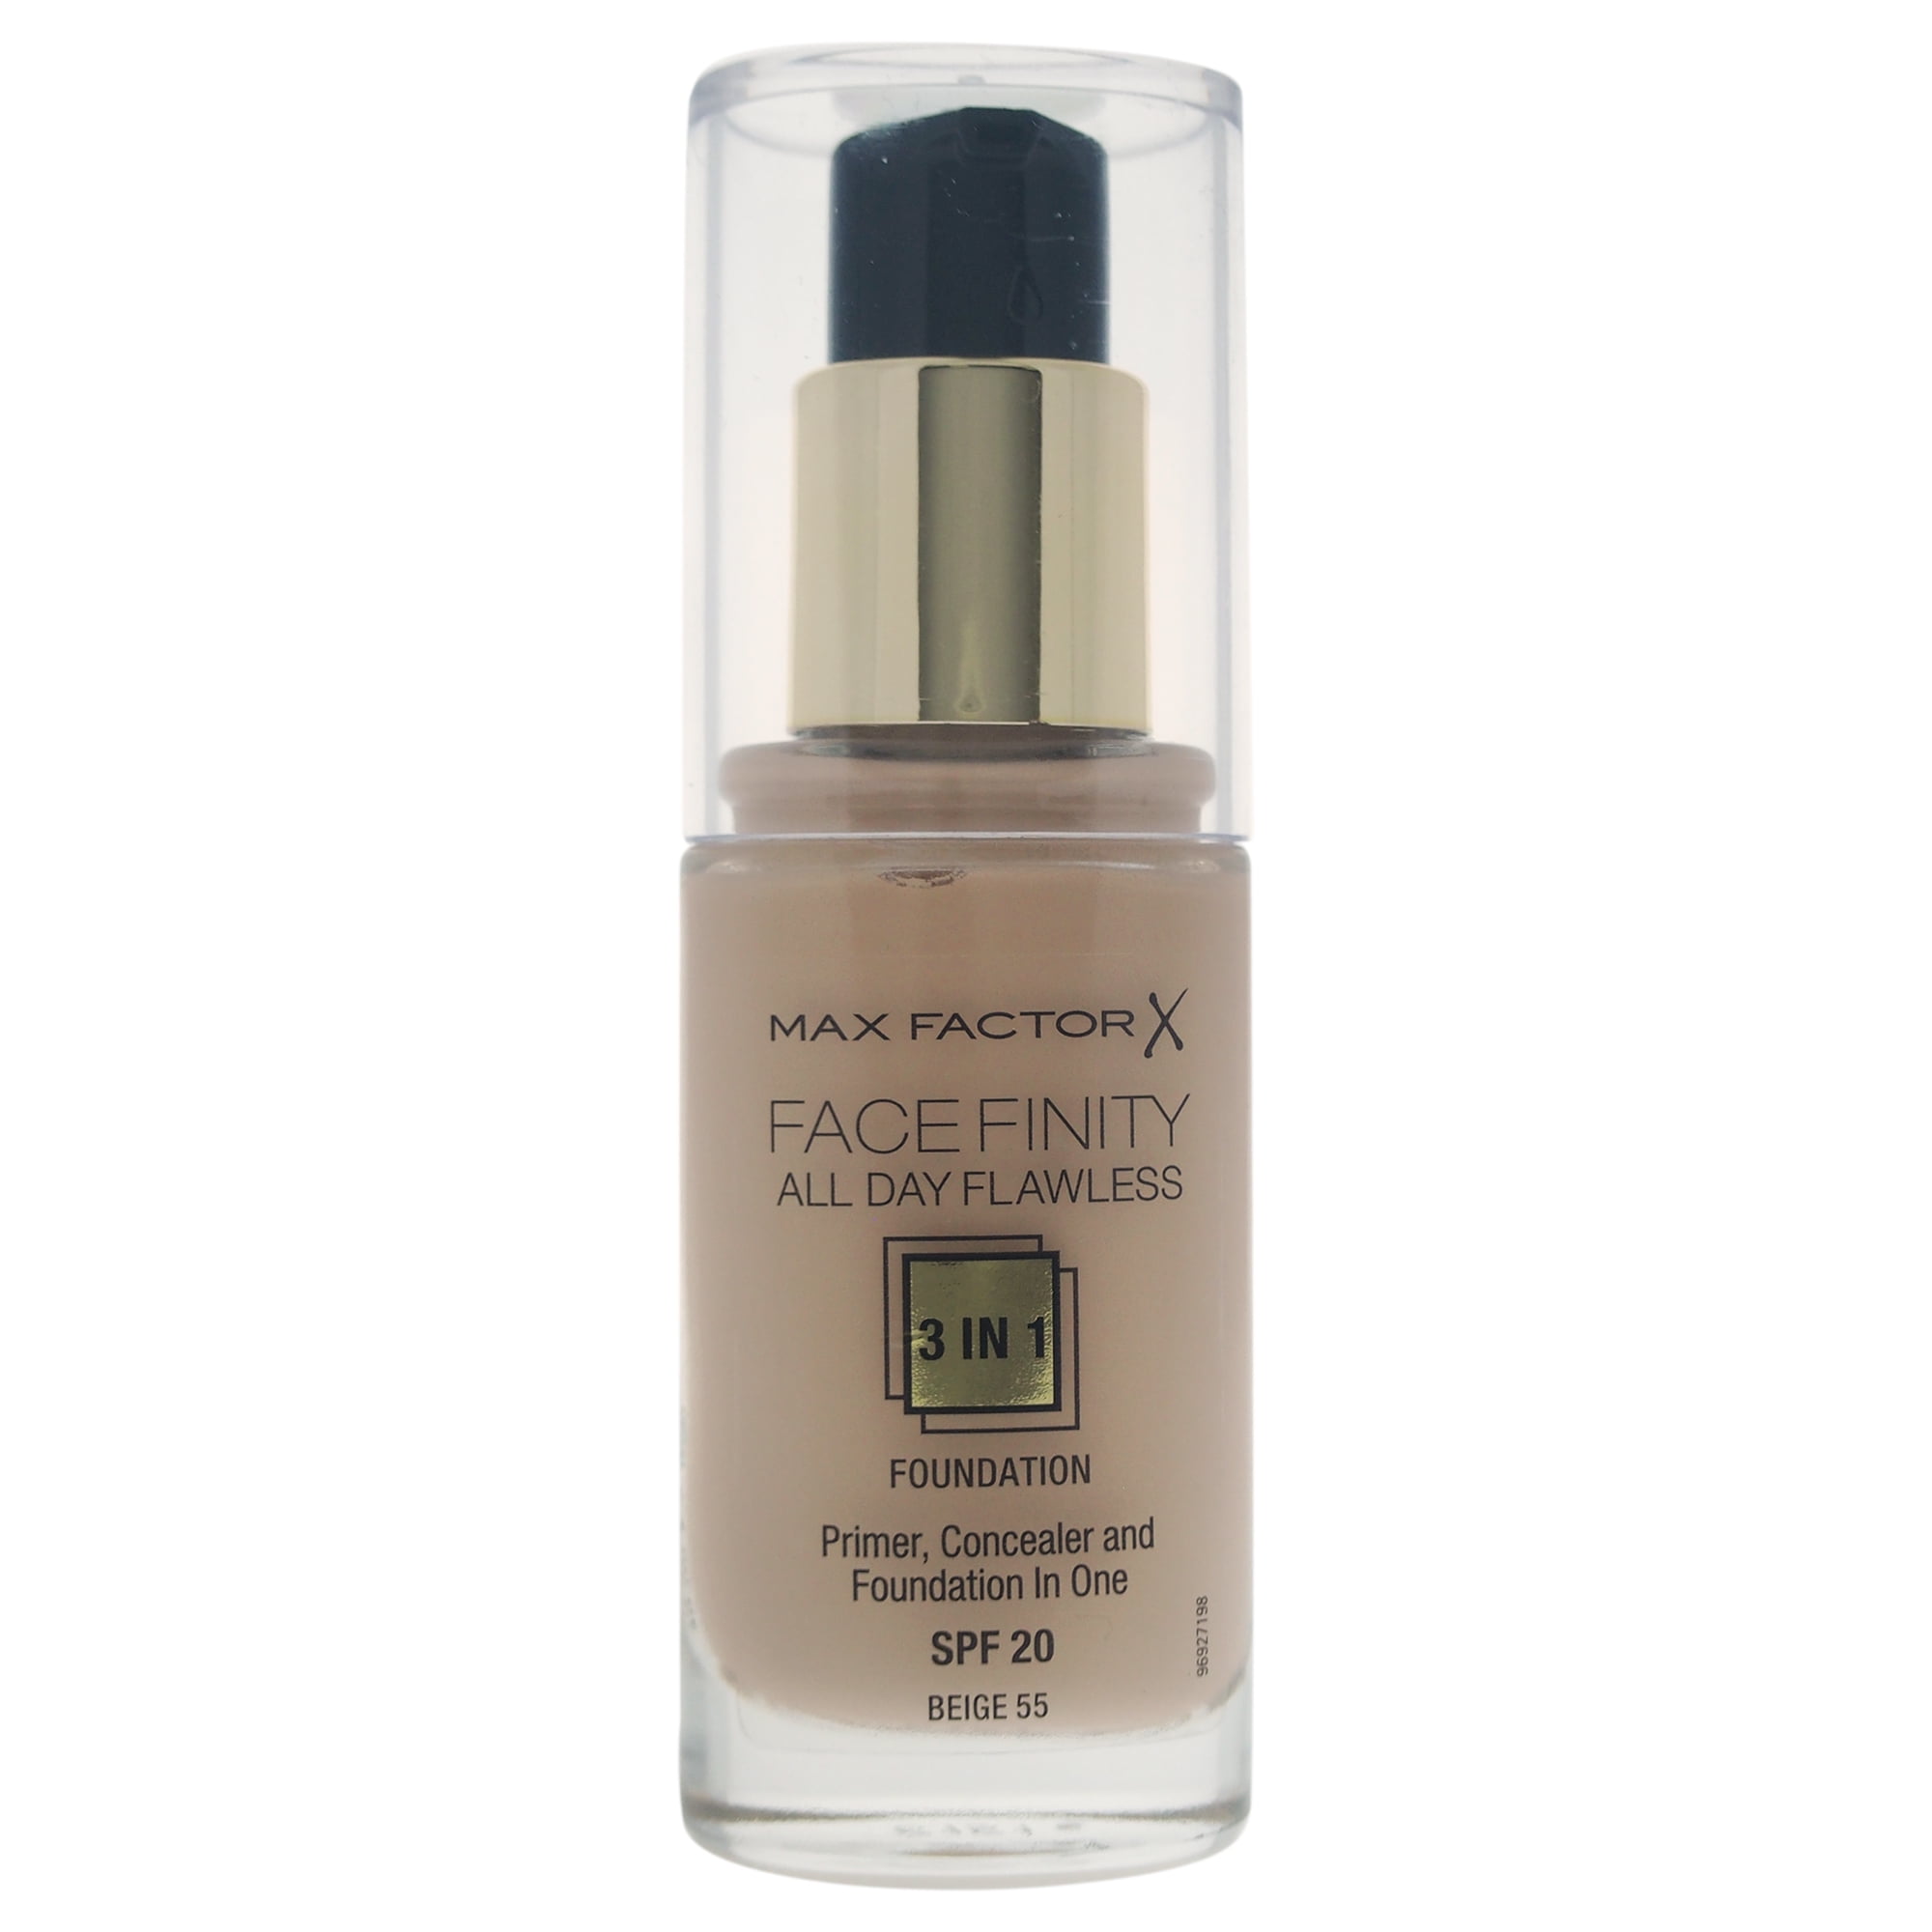 Thespian Tapijt Onze onderneming Facefinity All Day Flawless 3 In 1 Foundation SPF 20 - # 55 Beige by Max  Factor for Women - 30 ml Foundation - Walmart.com